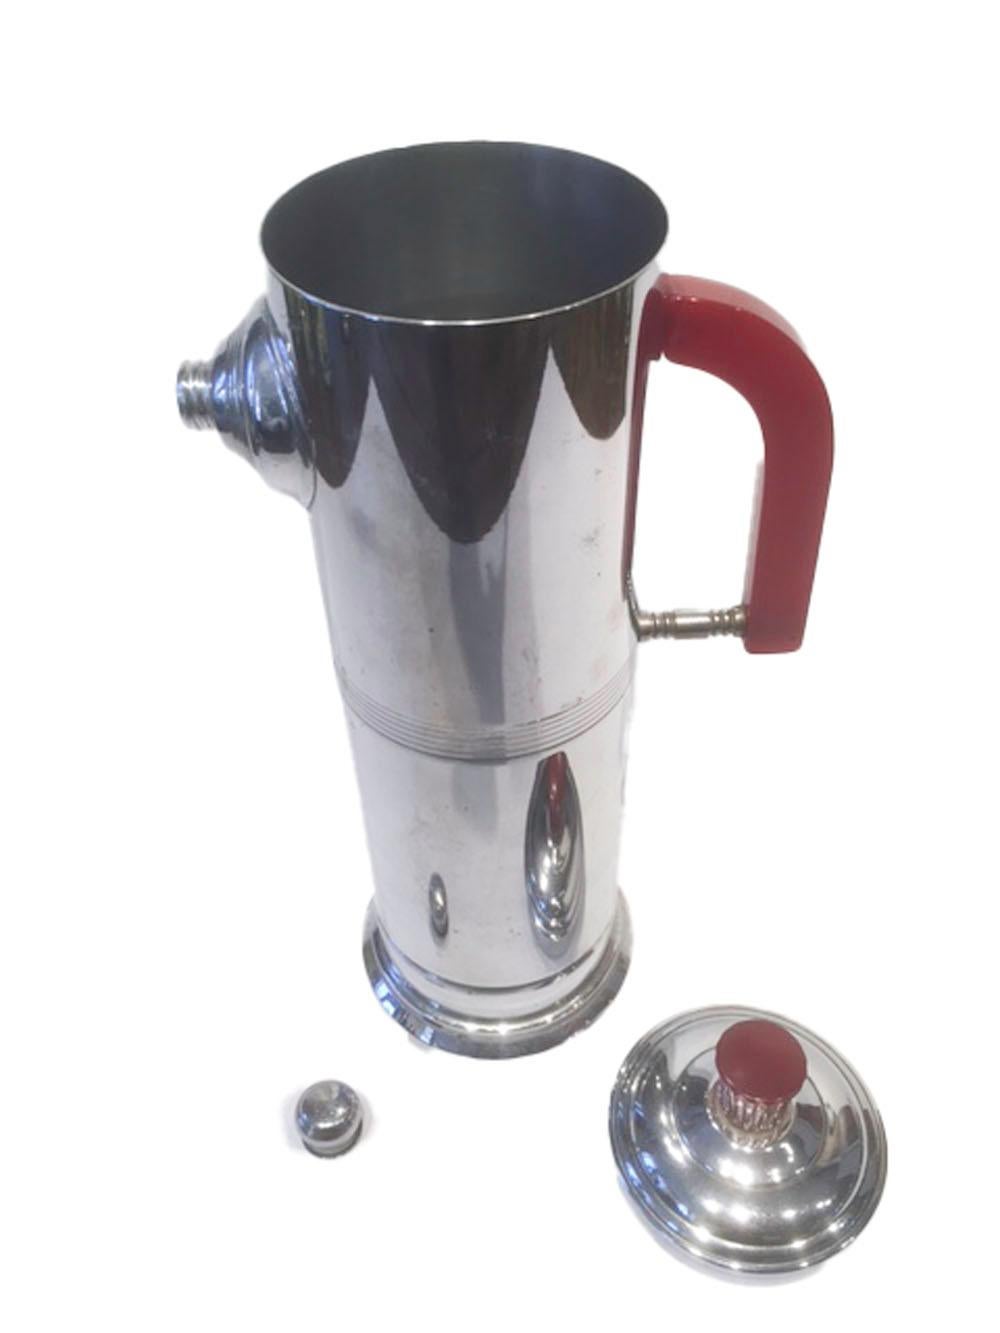 Machine Age Vintage Chrome Cocktail Shaker with Cherry Red Bakelite Handle and Knob For Sale